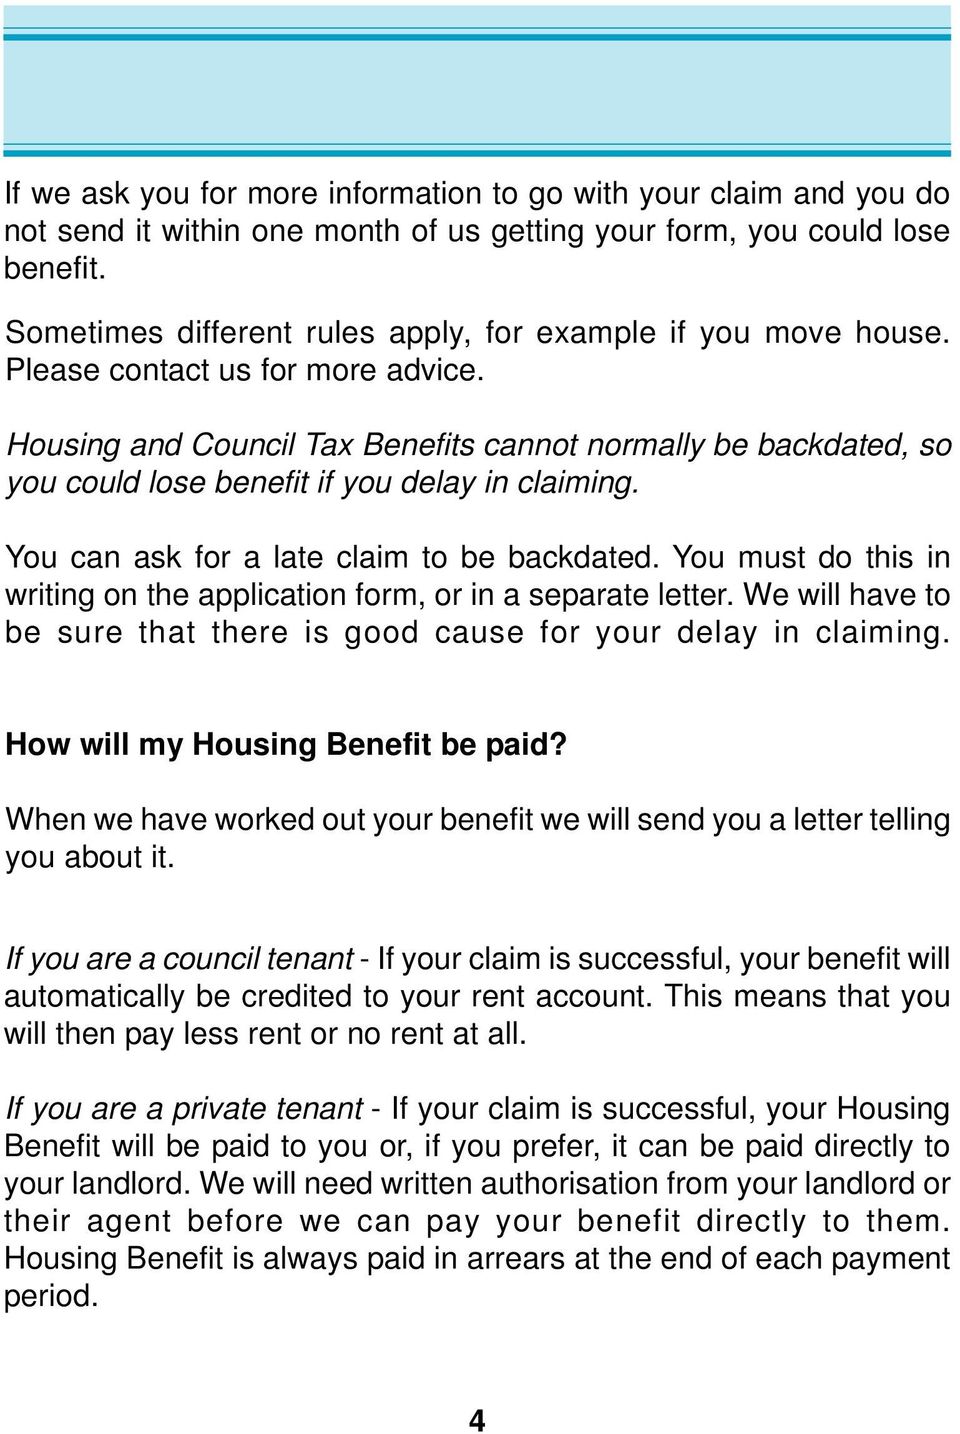 Housing and Council Tax Benefits cannot normally be backdated, so you could lose benefit if you delay in claiming. You can ask for a late claim to be backdated.